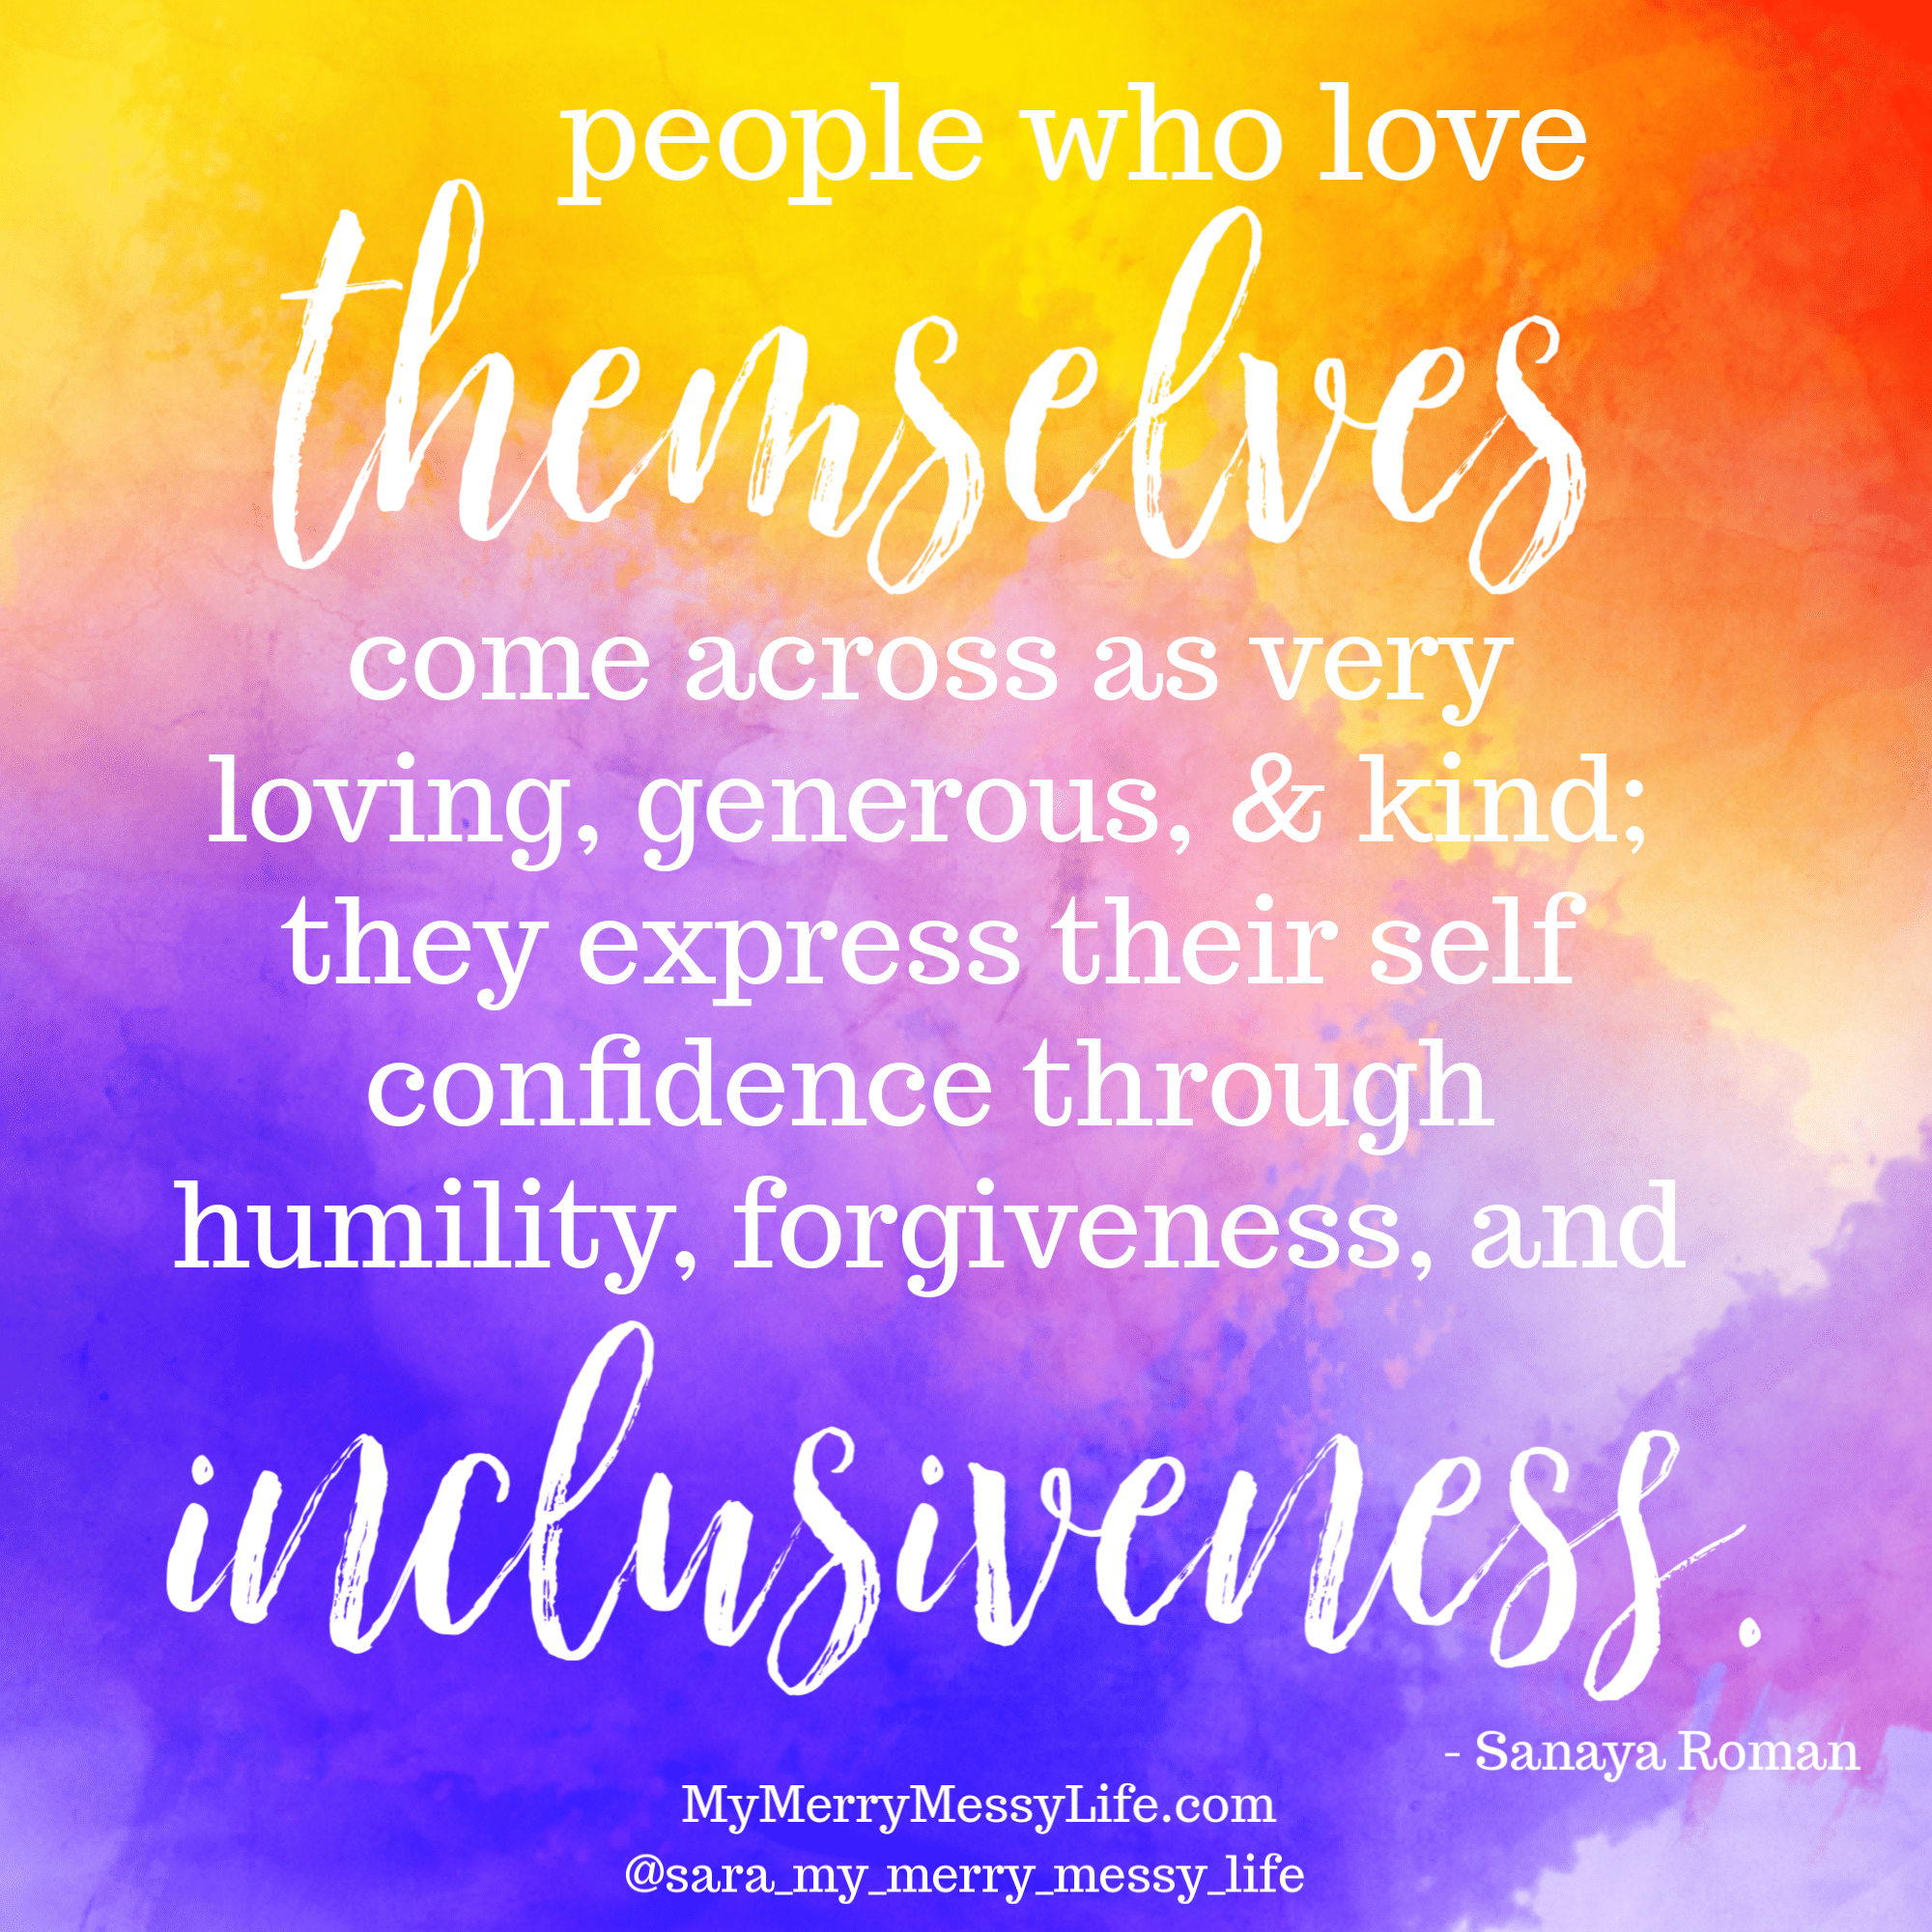 People who love themselves come across as very loving, generous, & kind; they express their self confidence through humility, forgiveness, and inclusiveness.